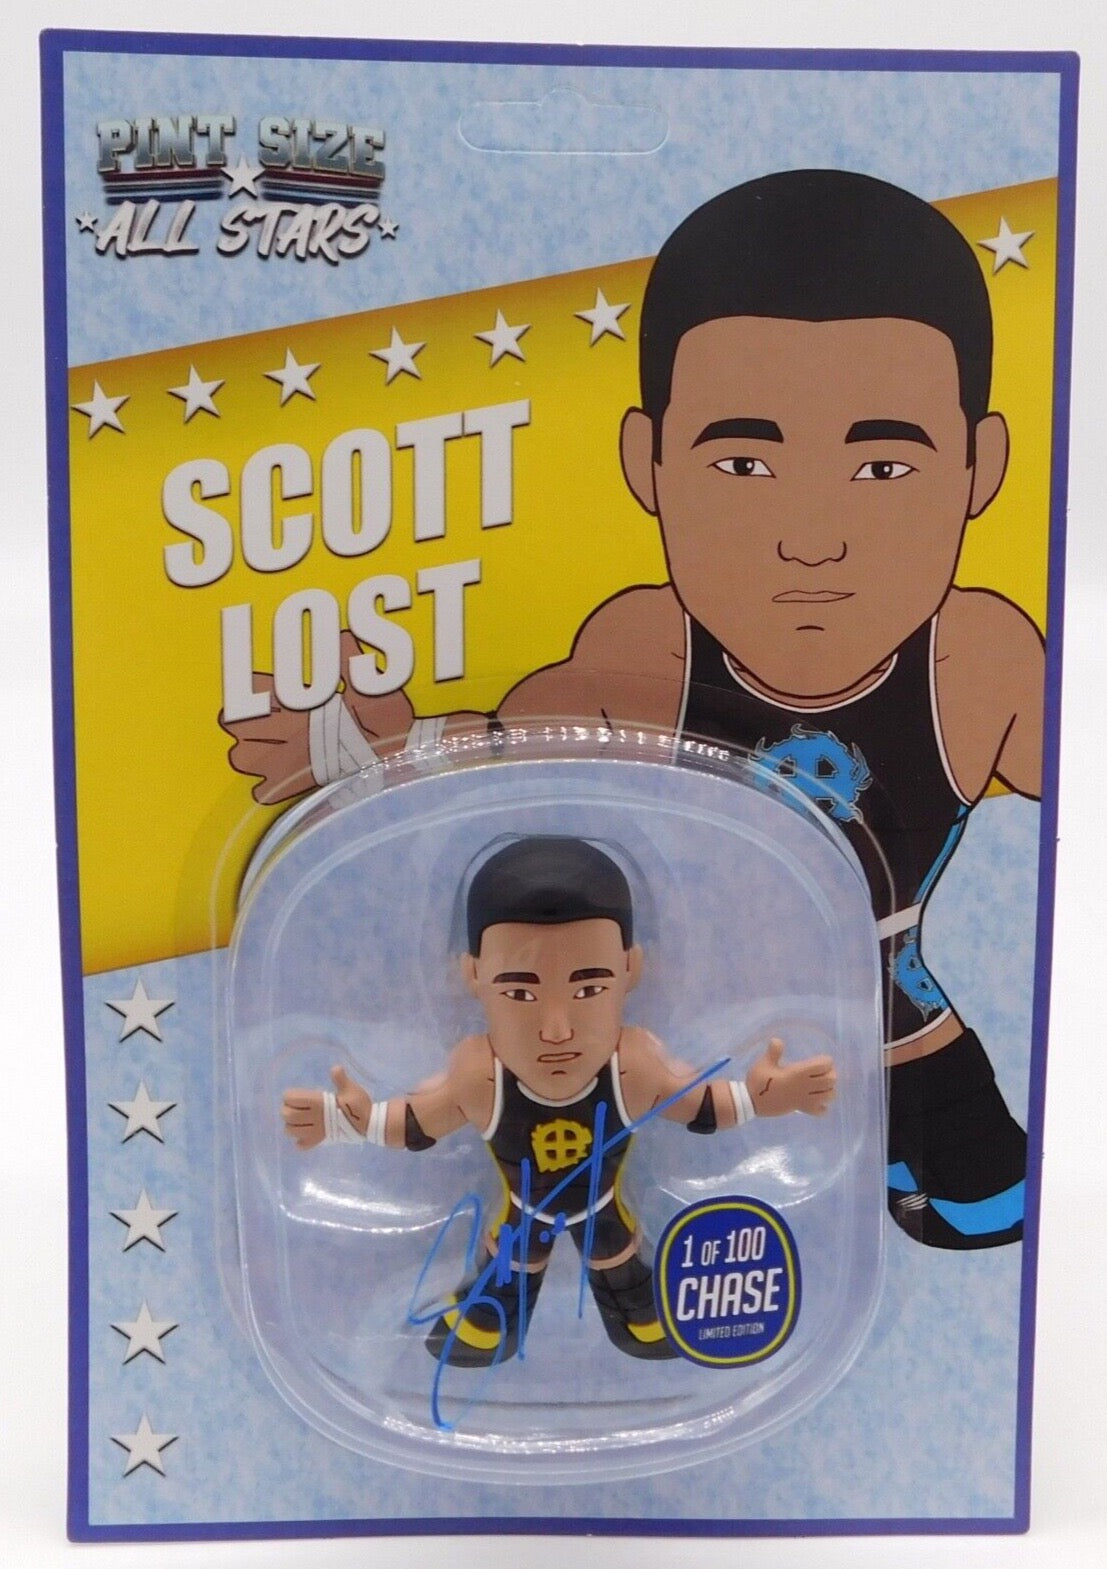 2021 Pro Wrestling Loot Pint Size All Stars Scott Lost [June, Yellow Chase]